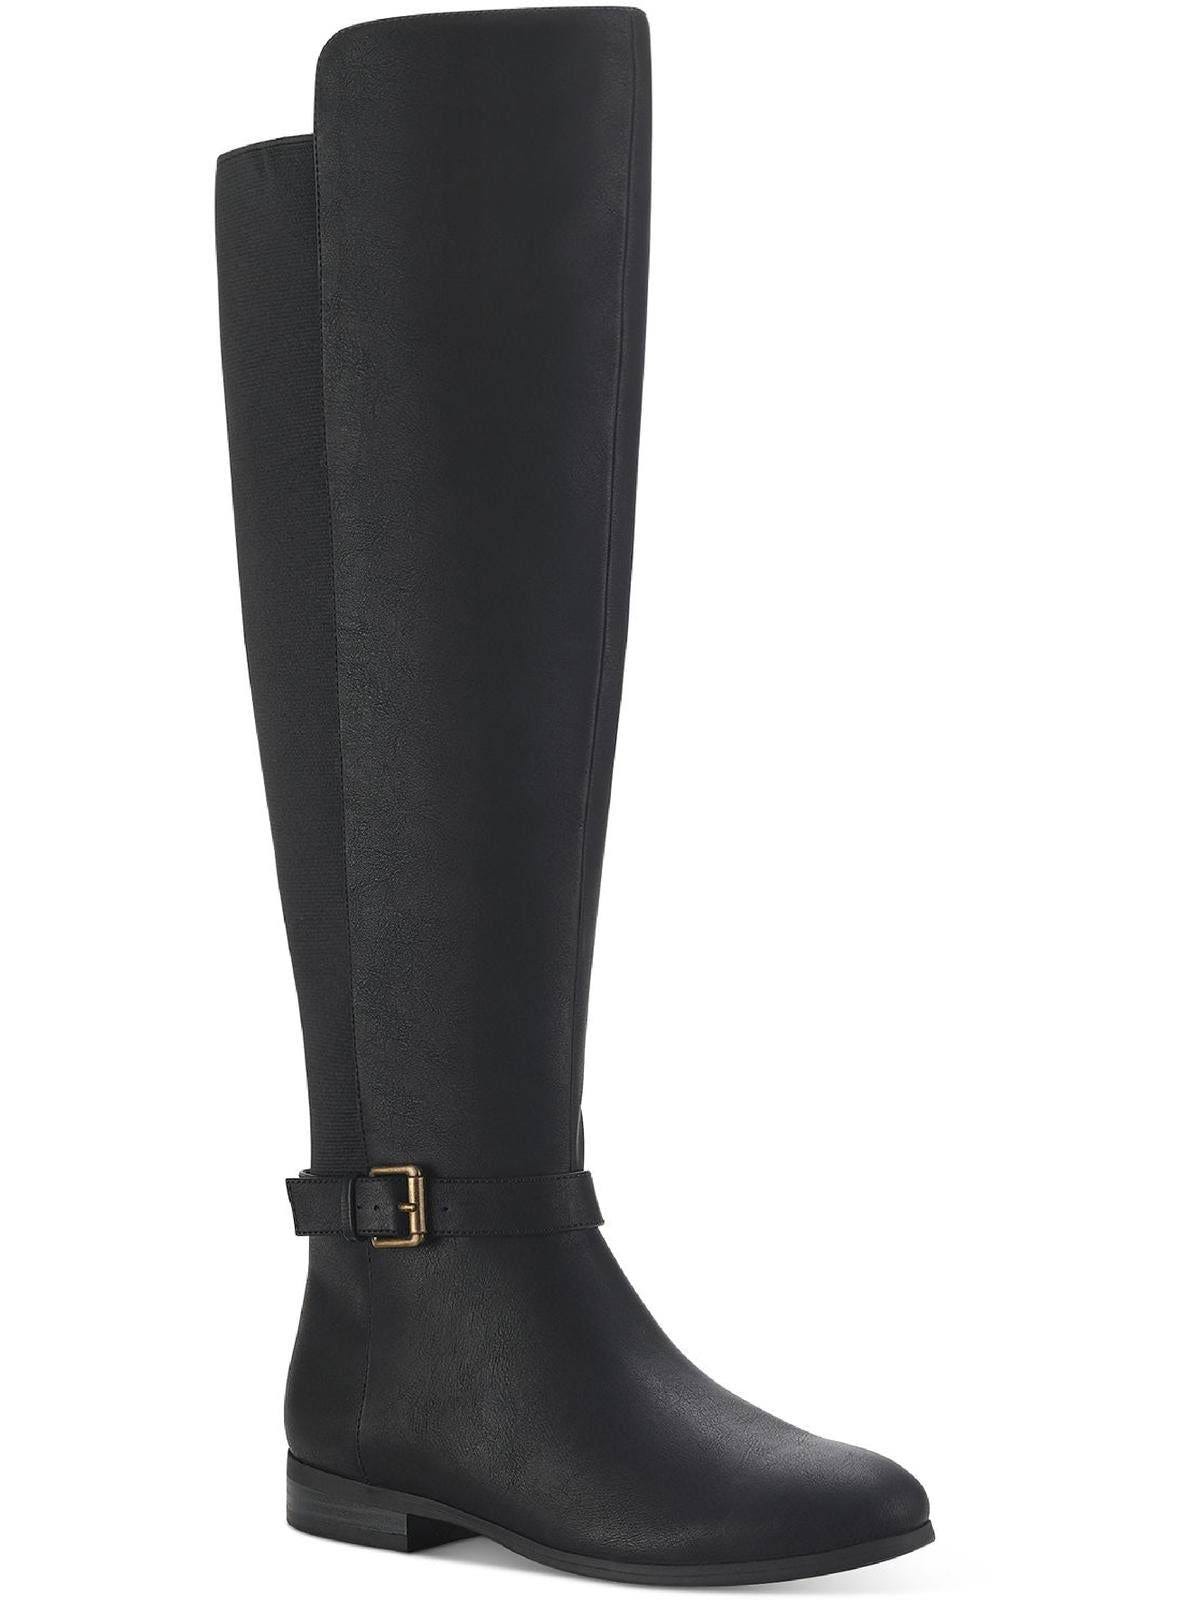 Stylish Wide-Calf Knee-High Boots with Buckled Ankle Straps | Image